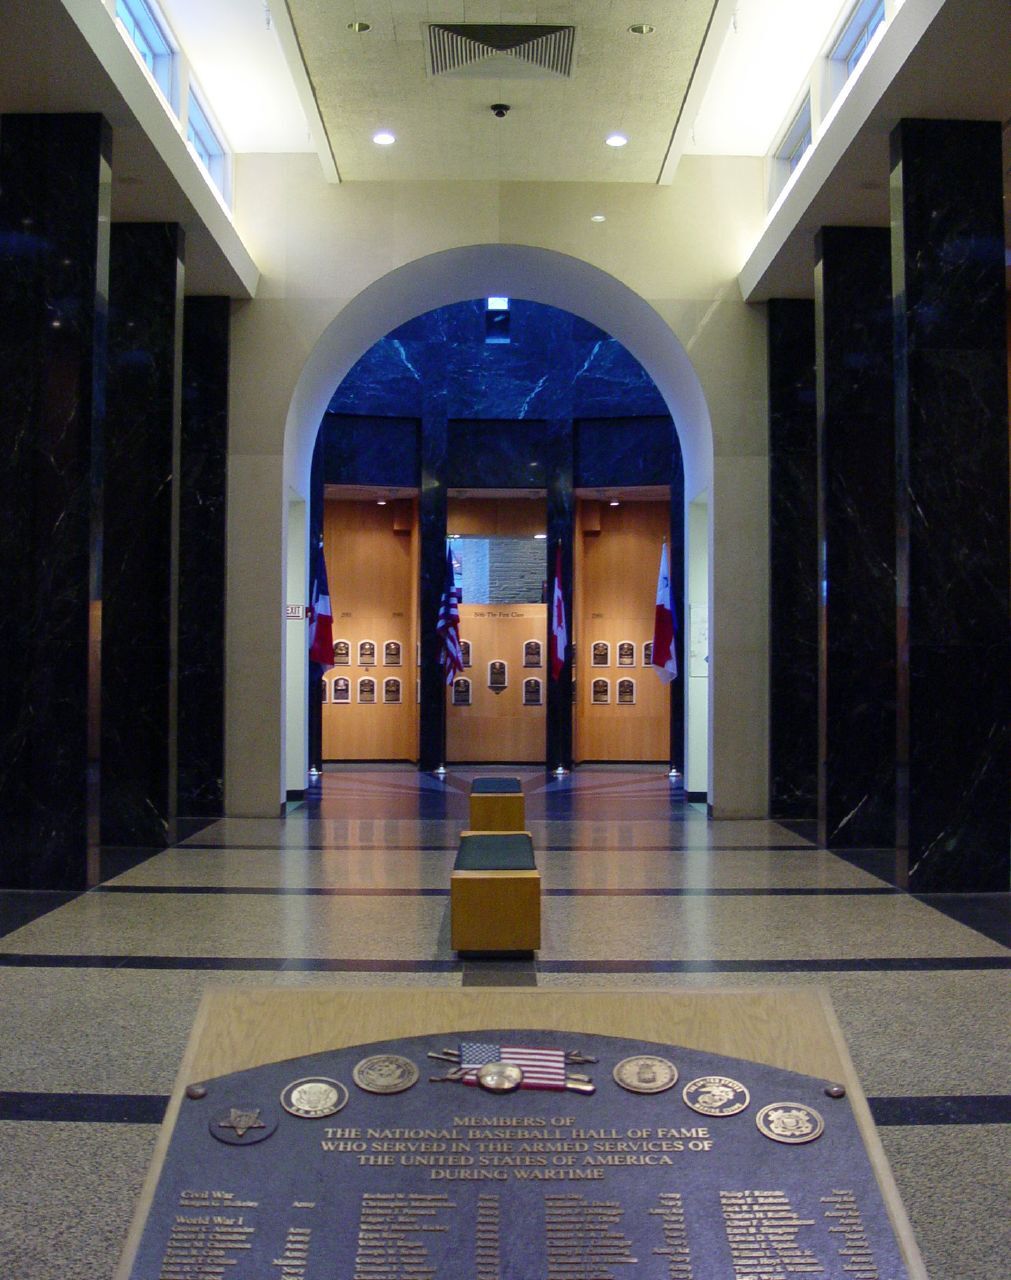 National Baseball Hall of Fame and Museum - After the St. Louis